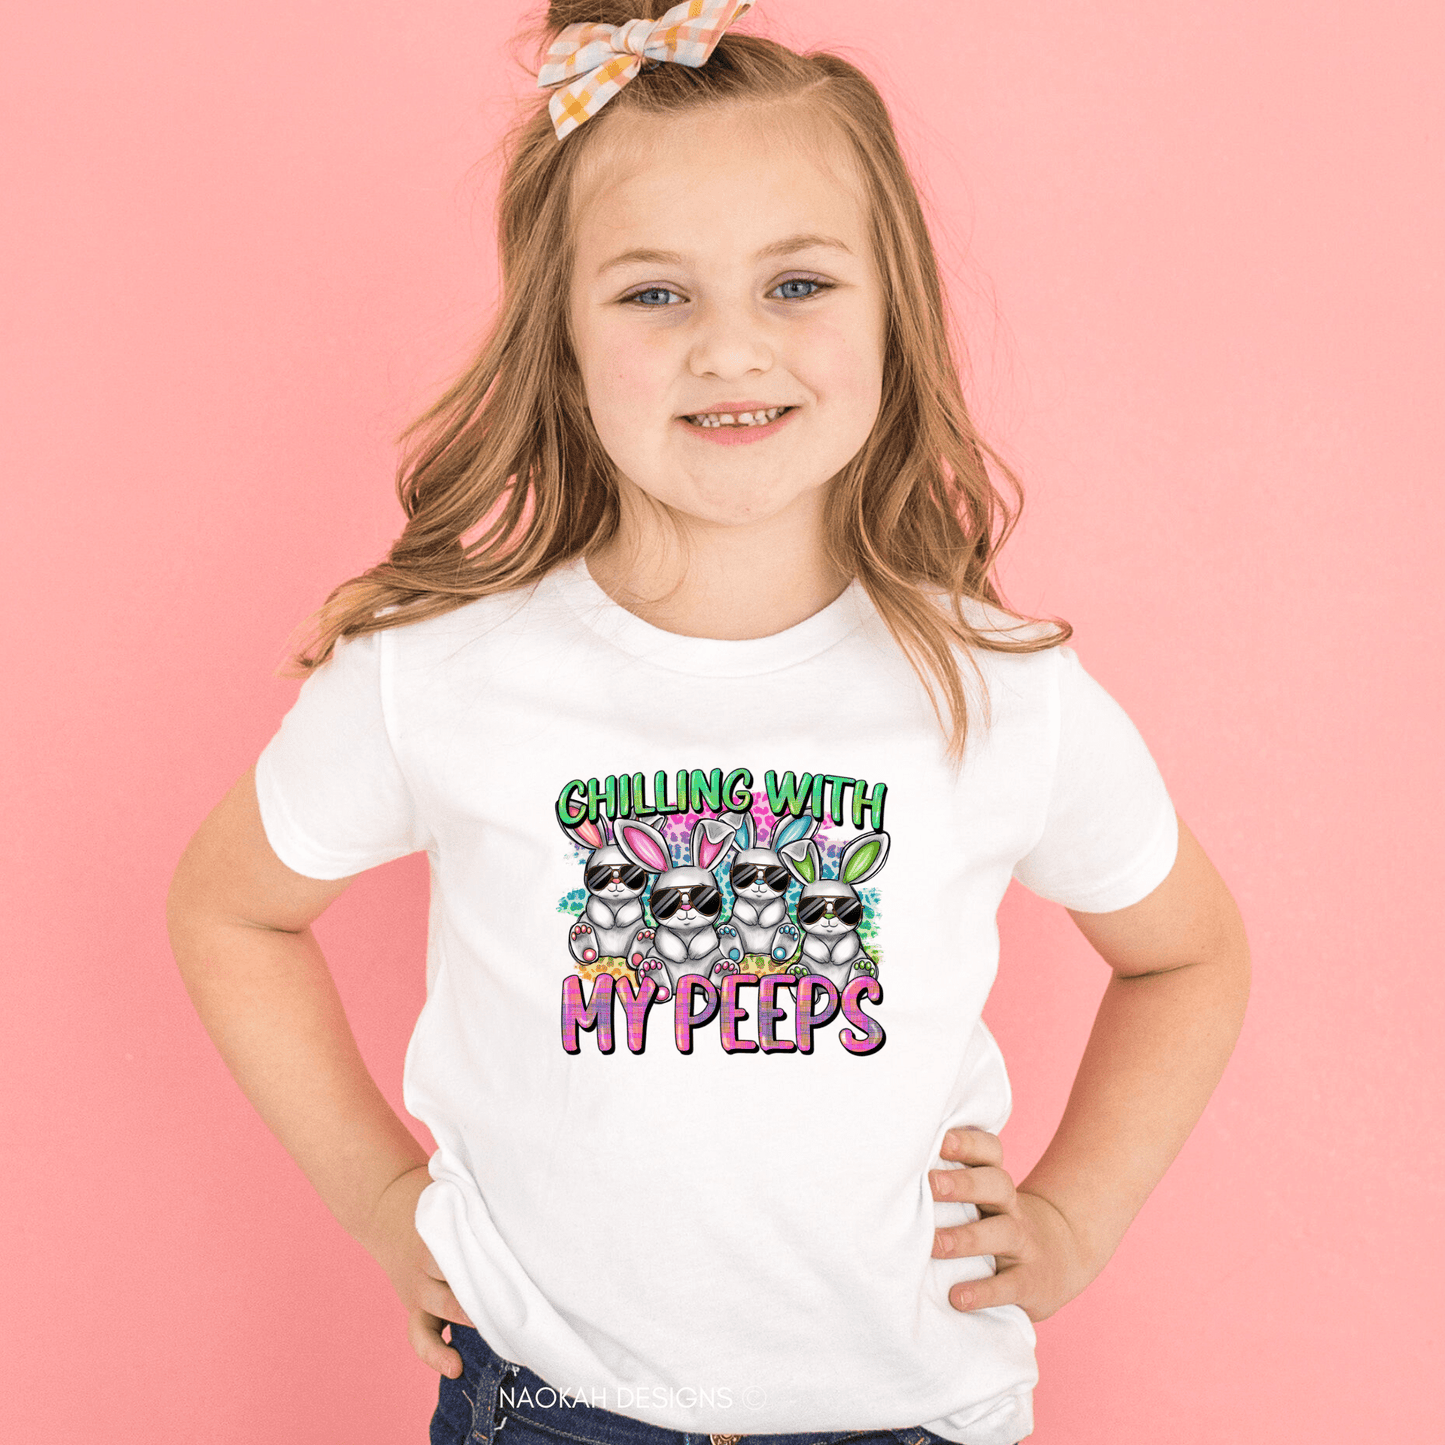 Chilling With My Peeps Shirt, Child's Easter Shirt, Kids Easter Bunny Shirt, Youth Easter Peeps Shirt, Easter Toddler Bunny Shirt